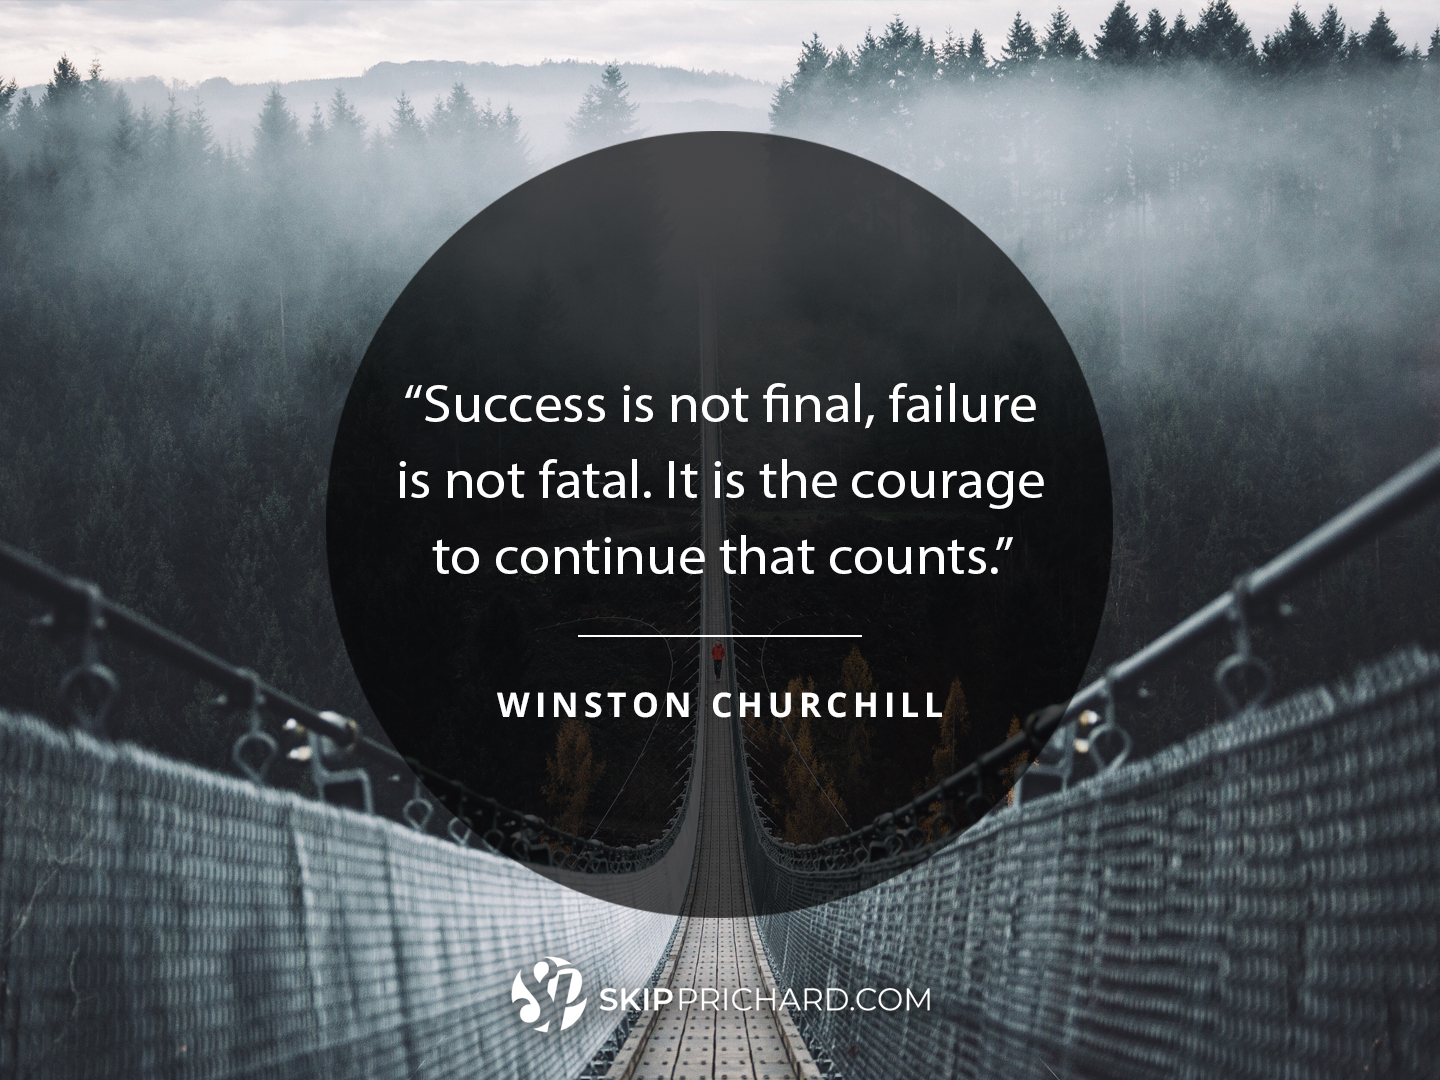 “Success is not final, failure is not fatal. It is the courage to continue that counts.”